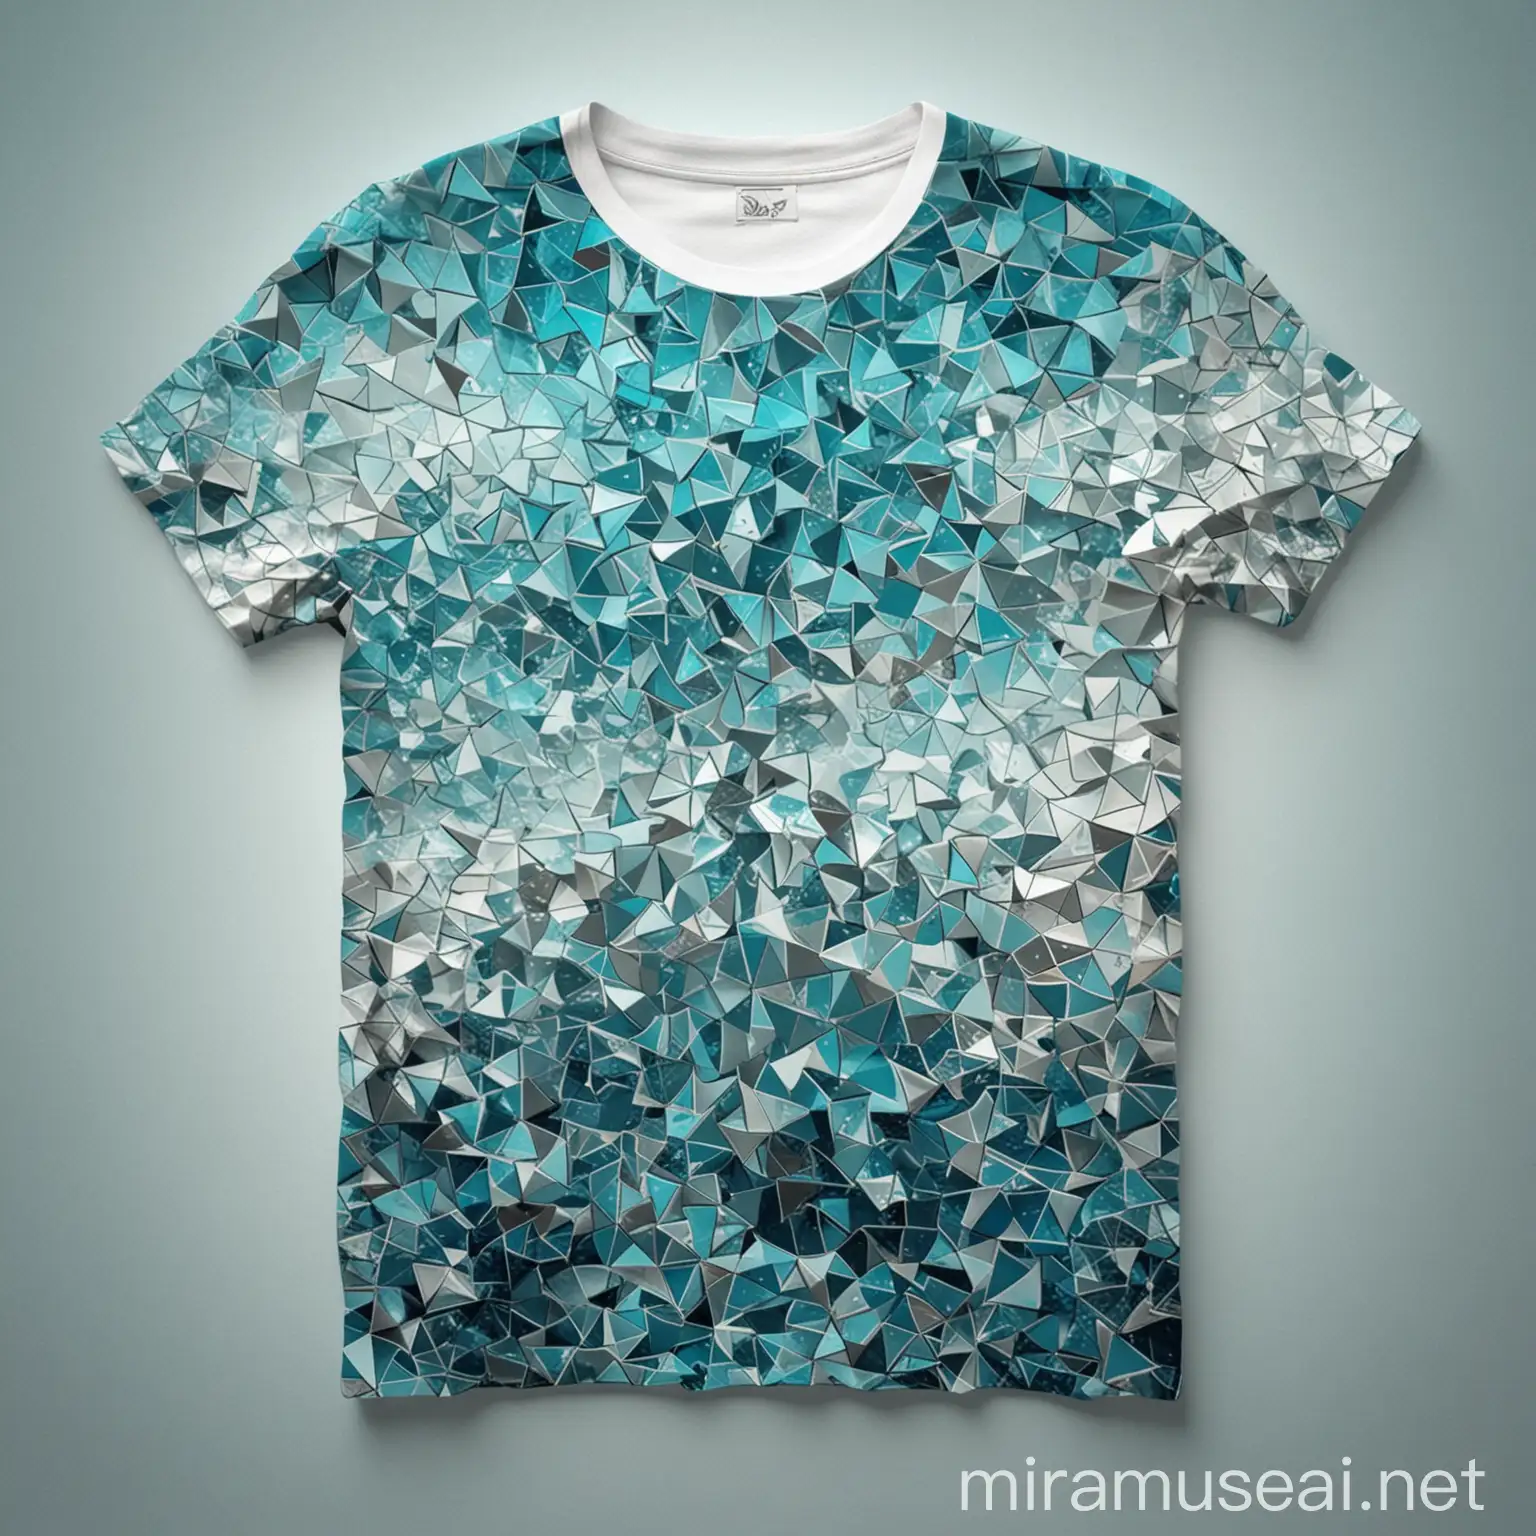 Abstract Fractal Art Tshirt Design with Broken Glass Effect and Ocean Waves Pattern